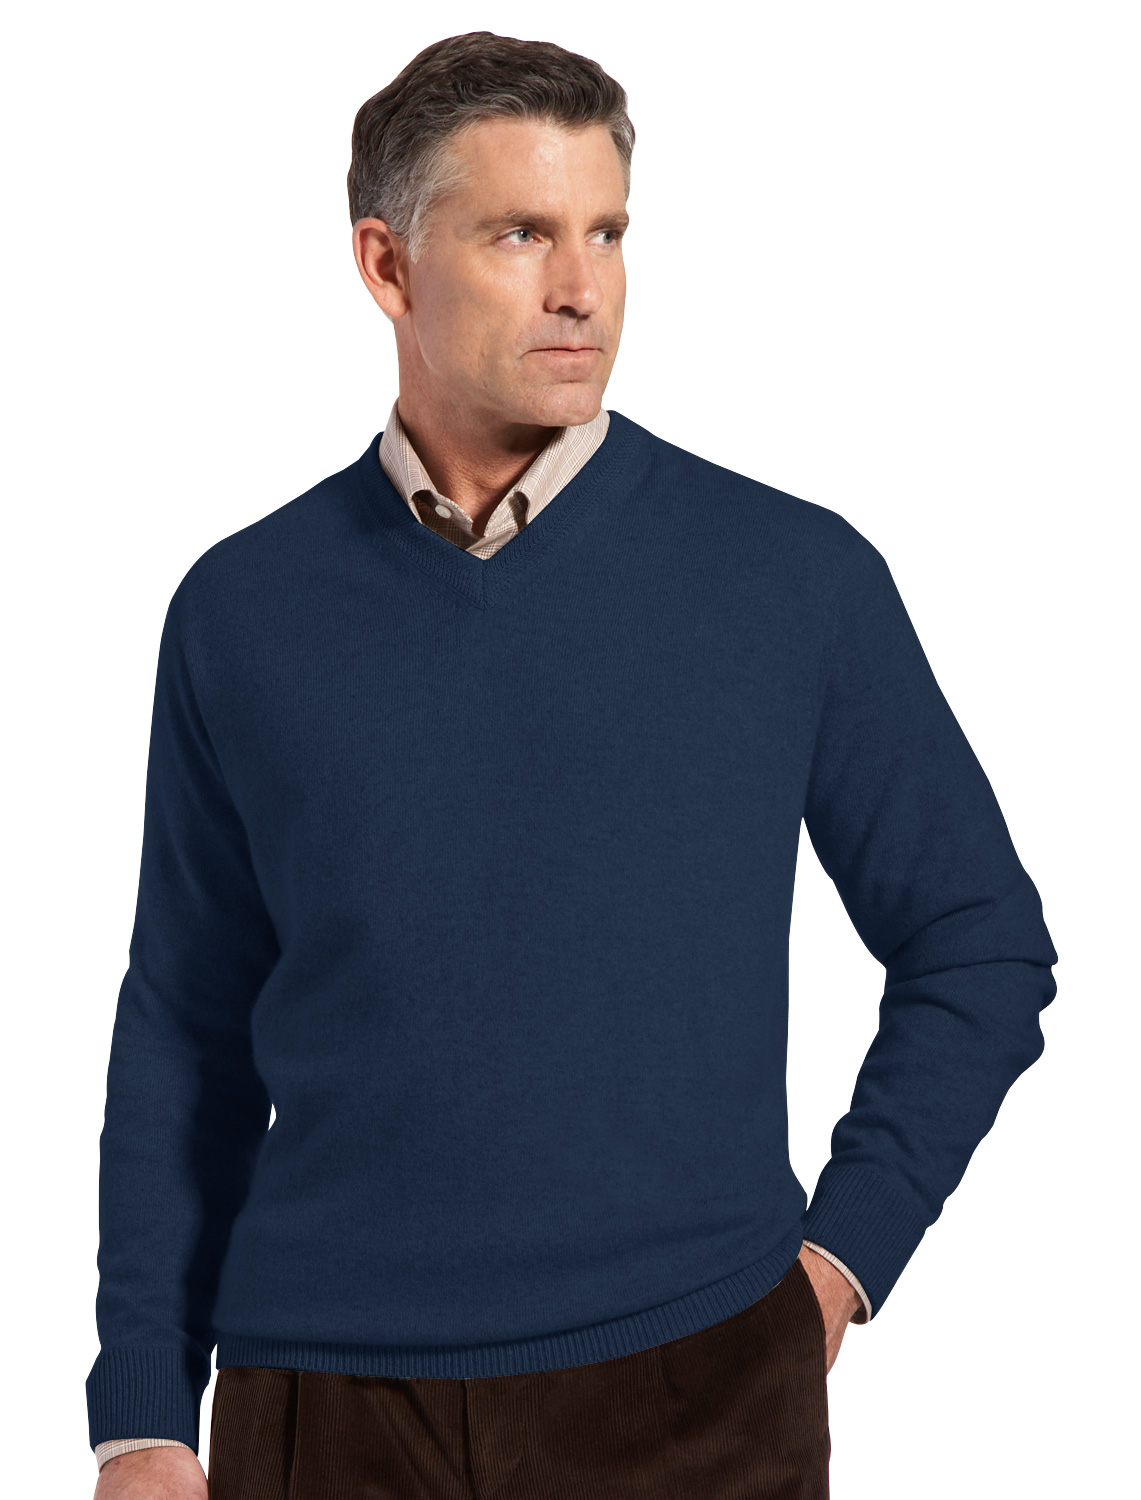 ROCHESTER Men's Big and Tall Cashmere V-Neck Sweater